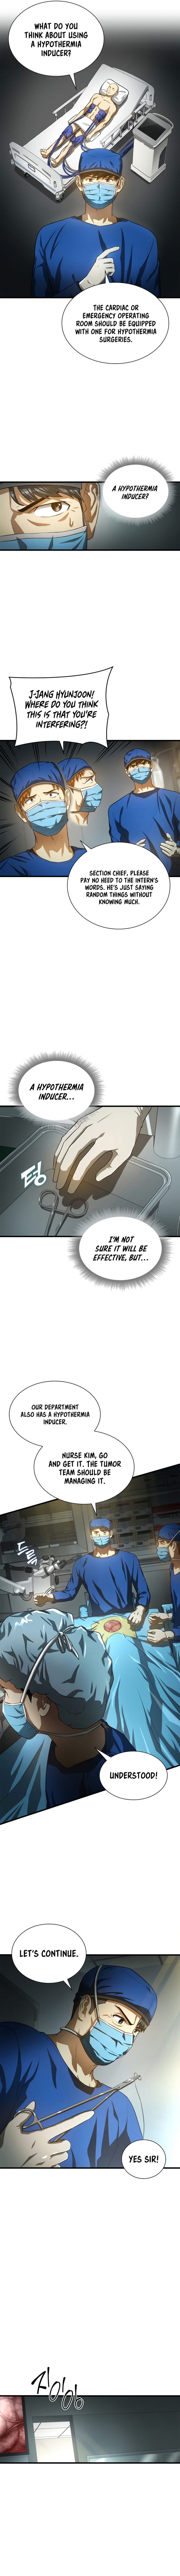 Perfect Surgeon - Chapter 18 Page 8